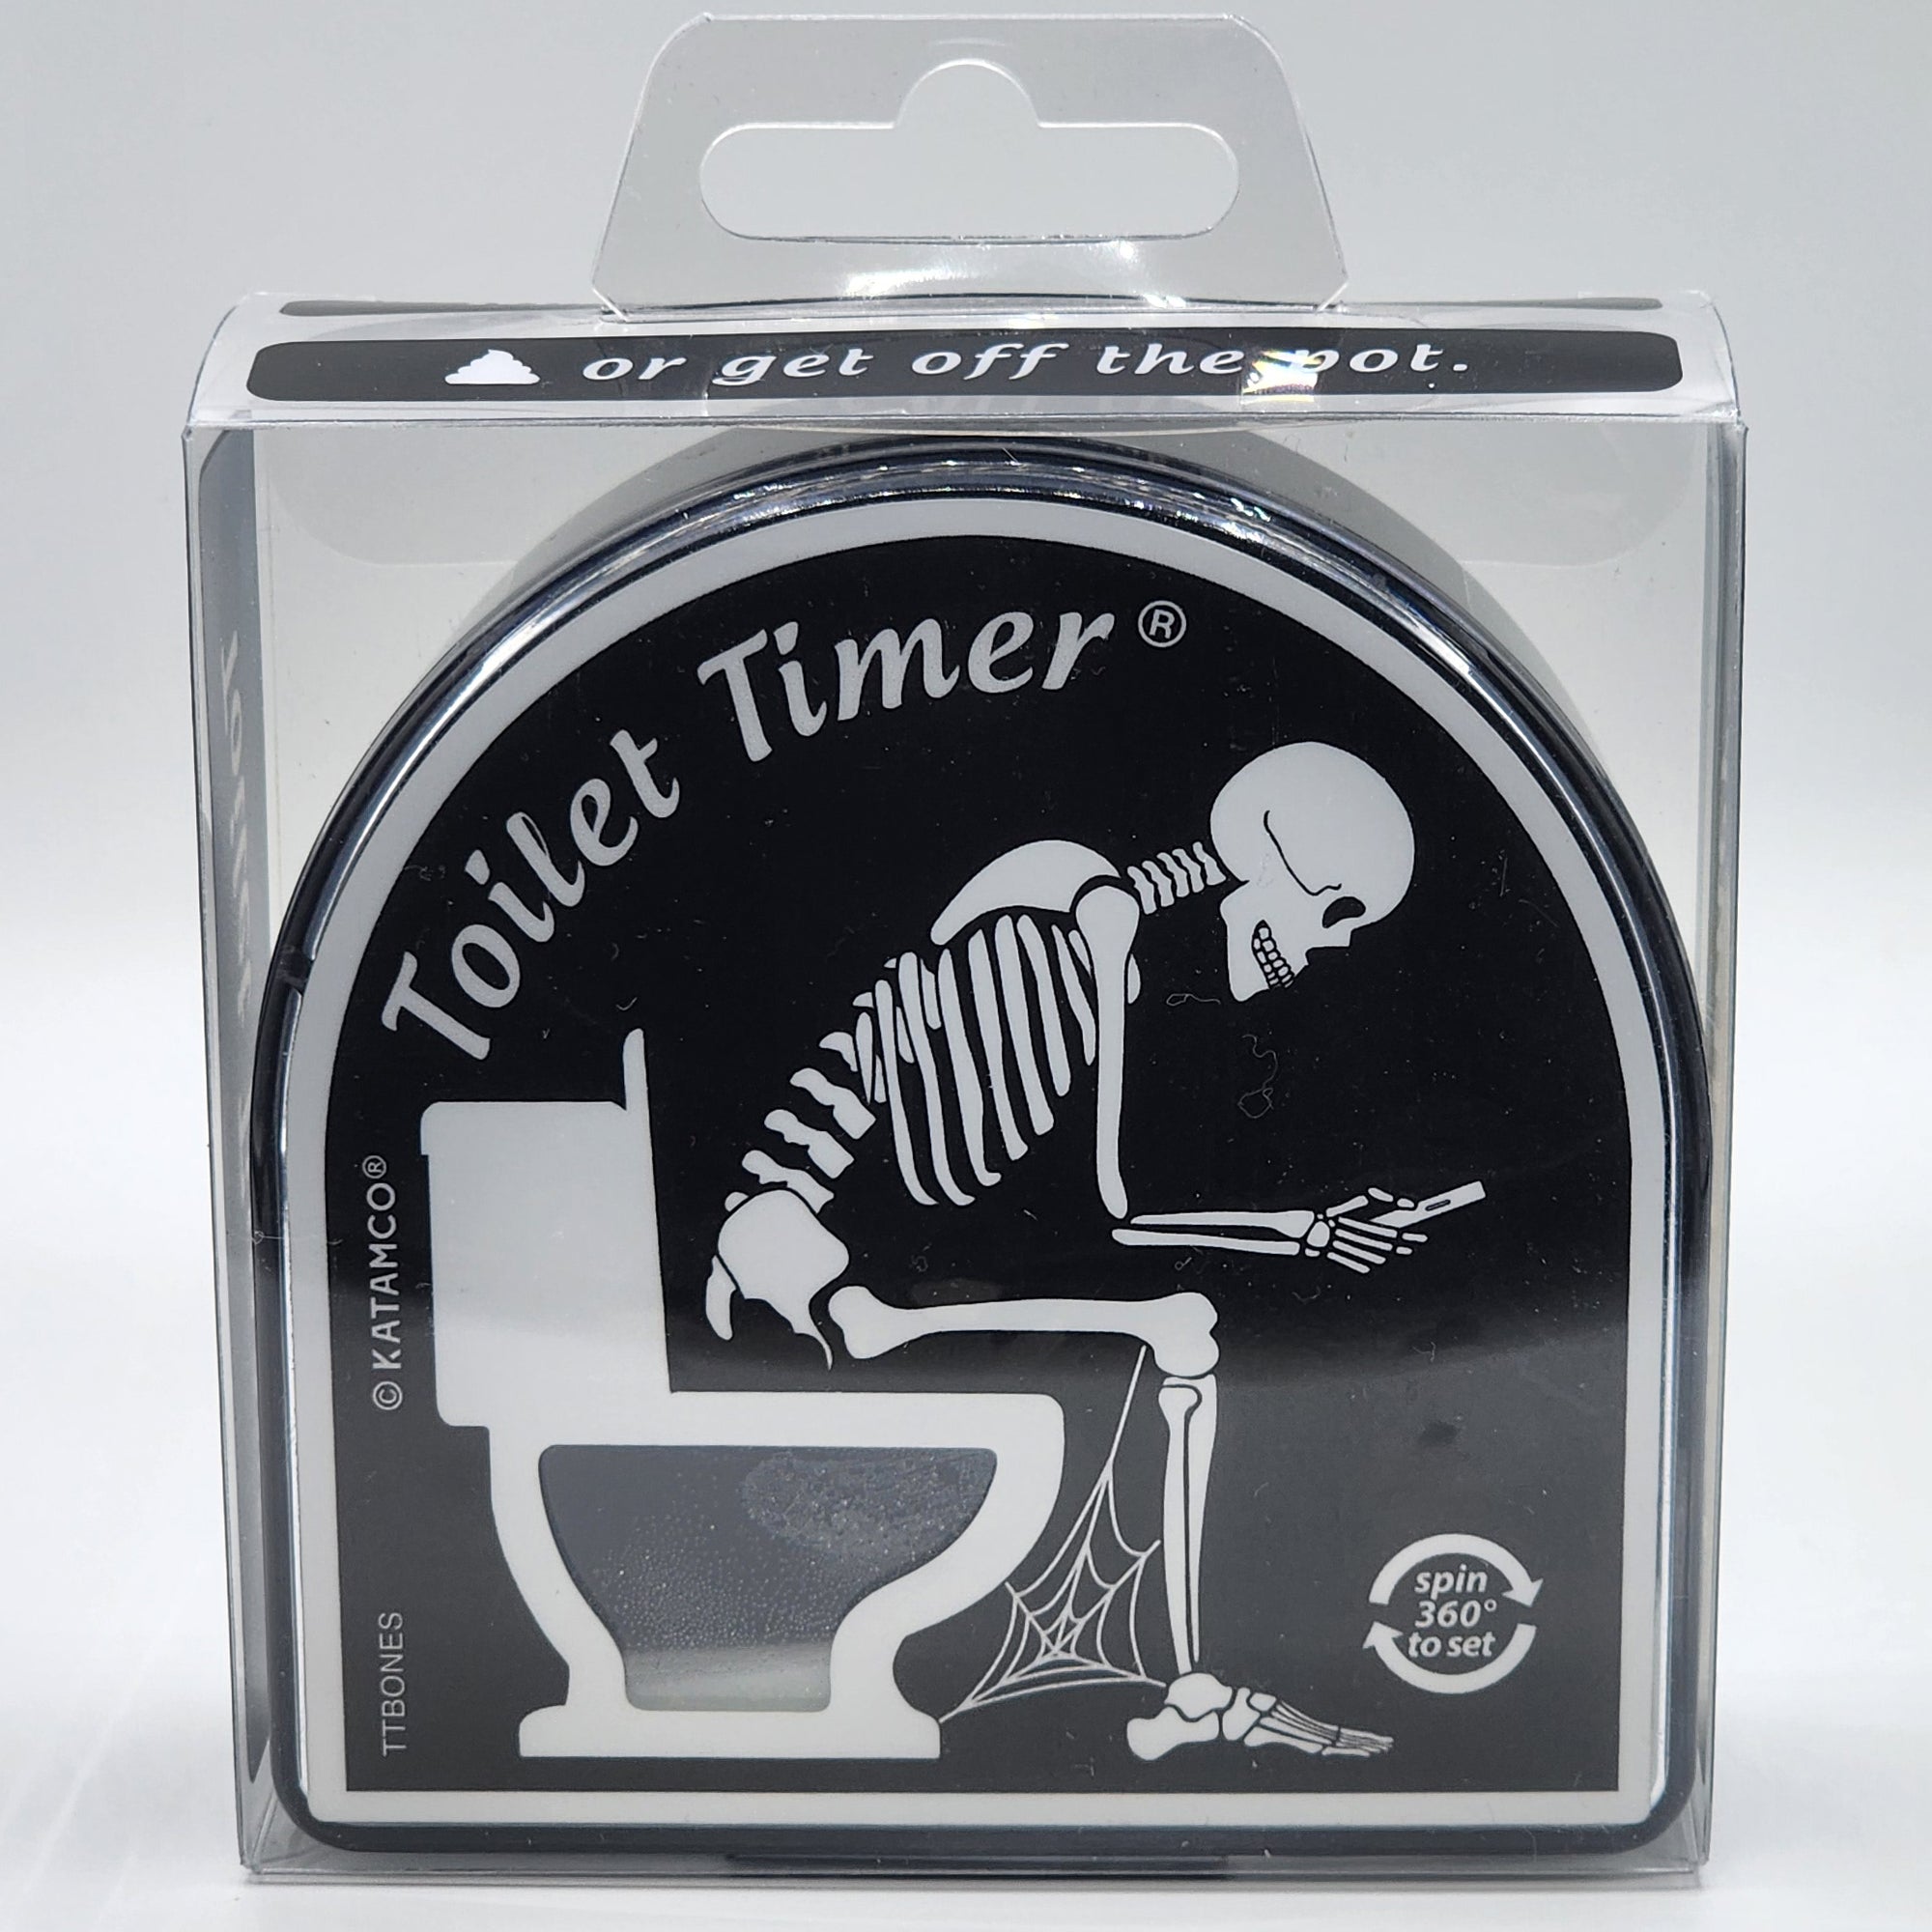 Toilet Timer for Dads - Funny Father's Day Gift